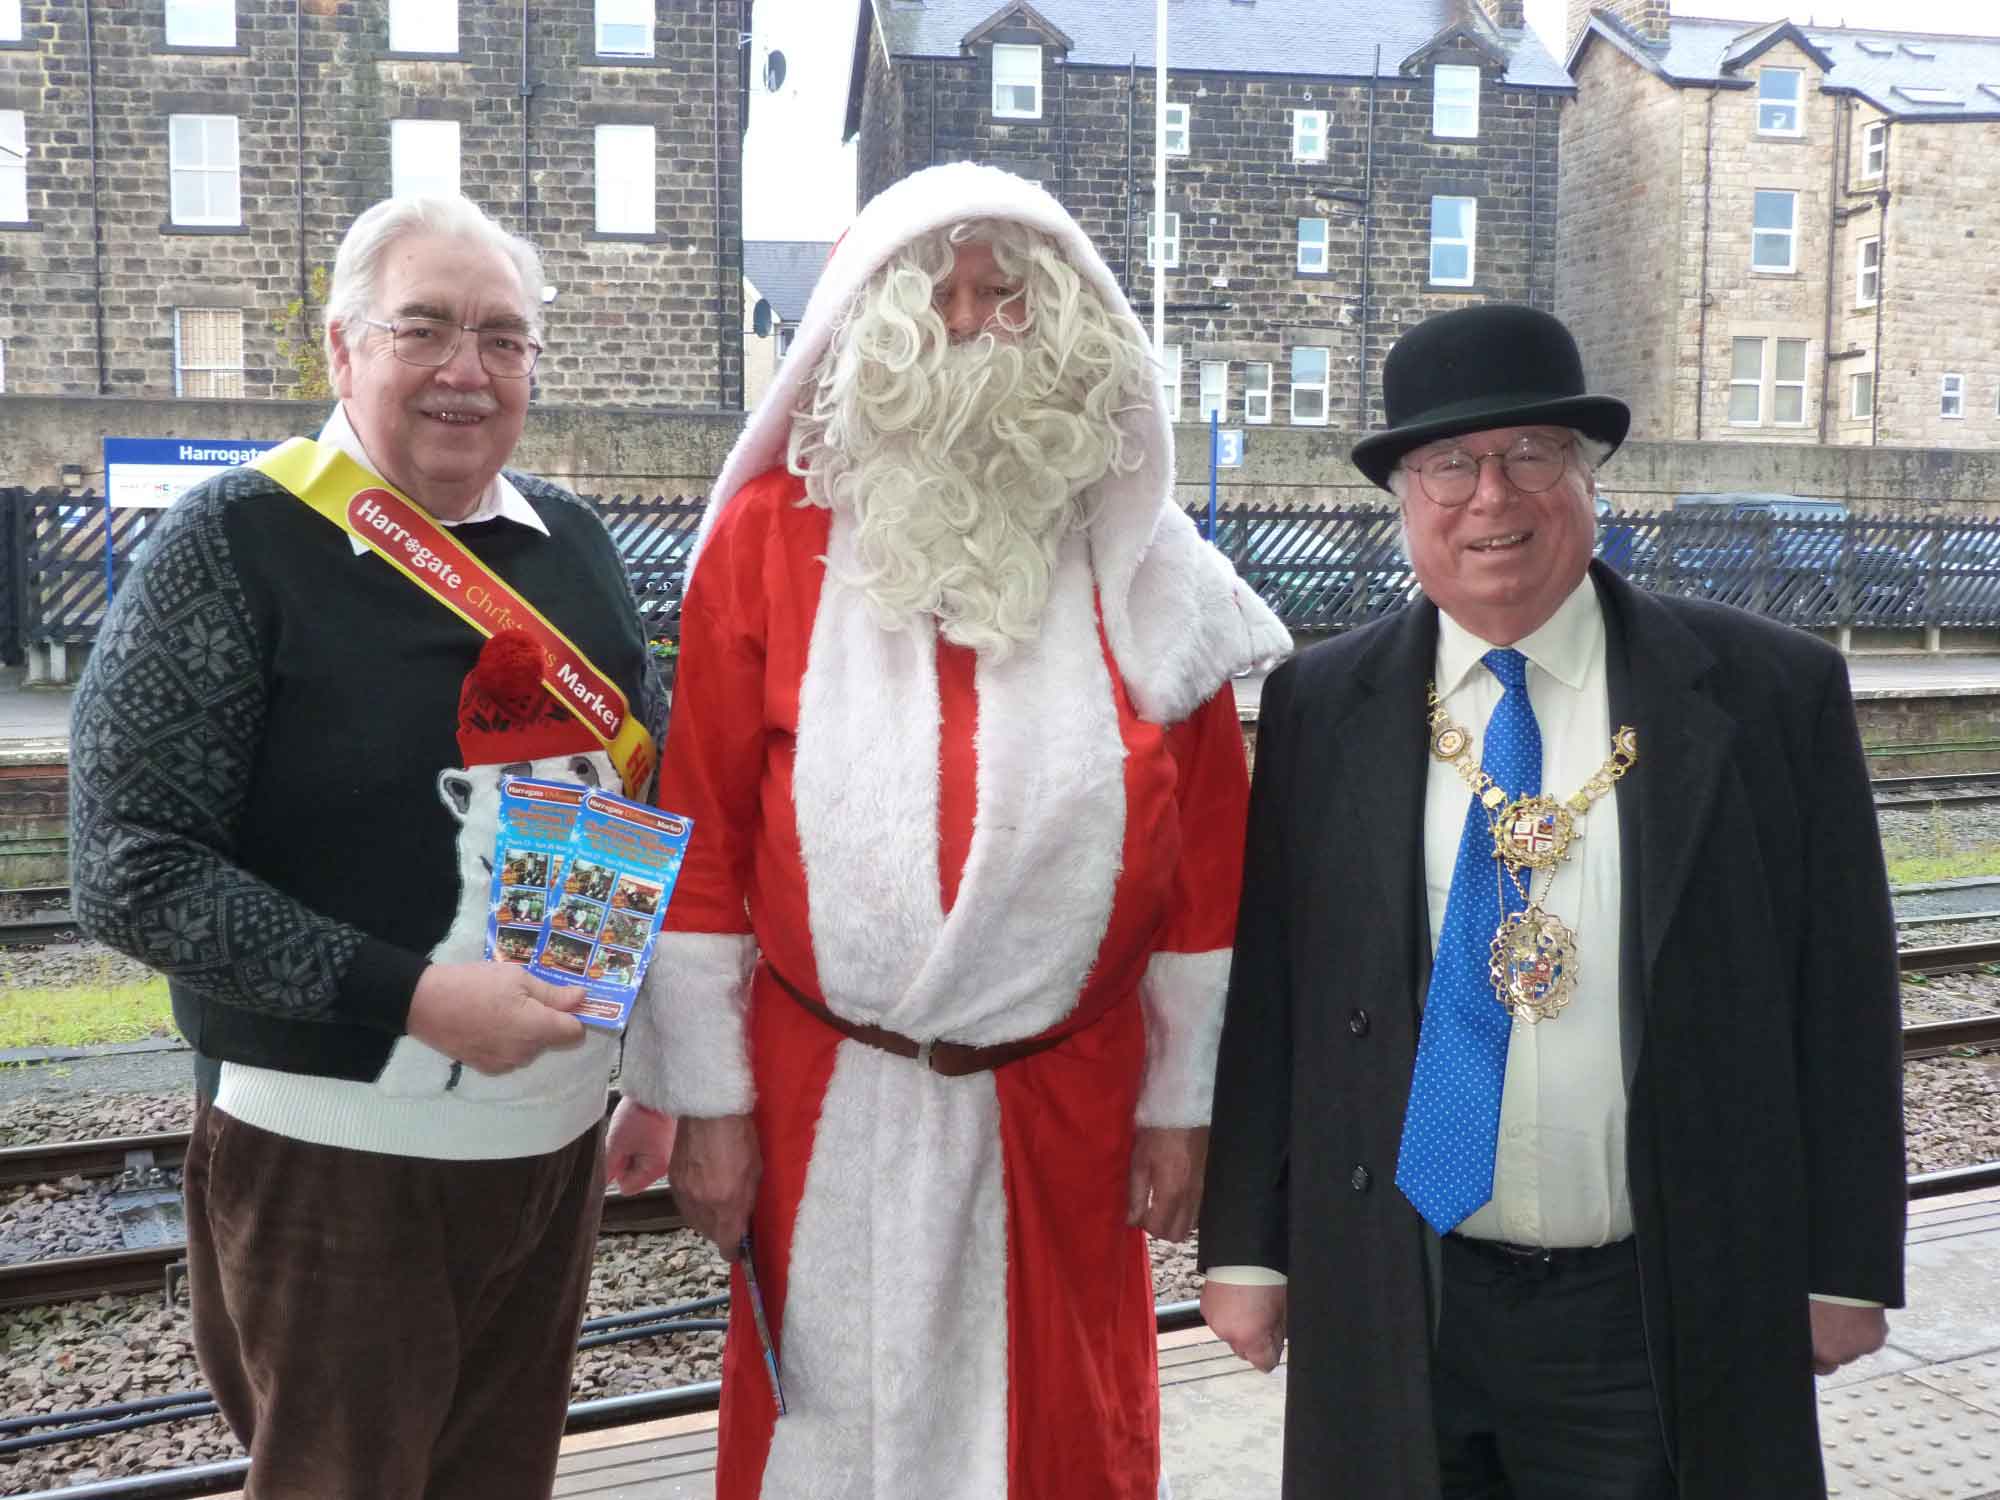 Market Maker Mike Edward, Santa, and the Mayor of Harrogate Coun Nick Brown prepare to welcome visitors on the Virgin Trains East Coast Christmas Market Specials to Harrogate